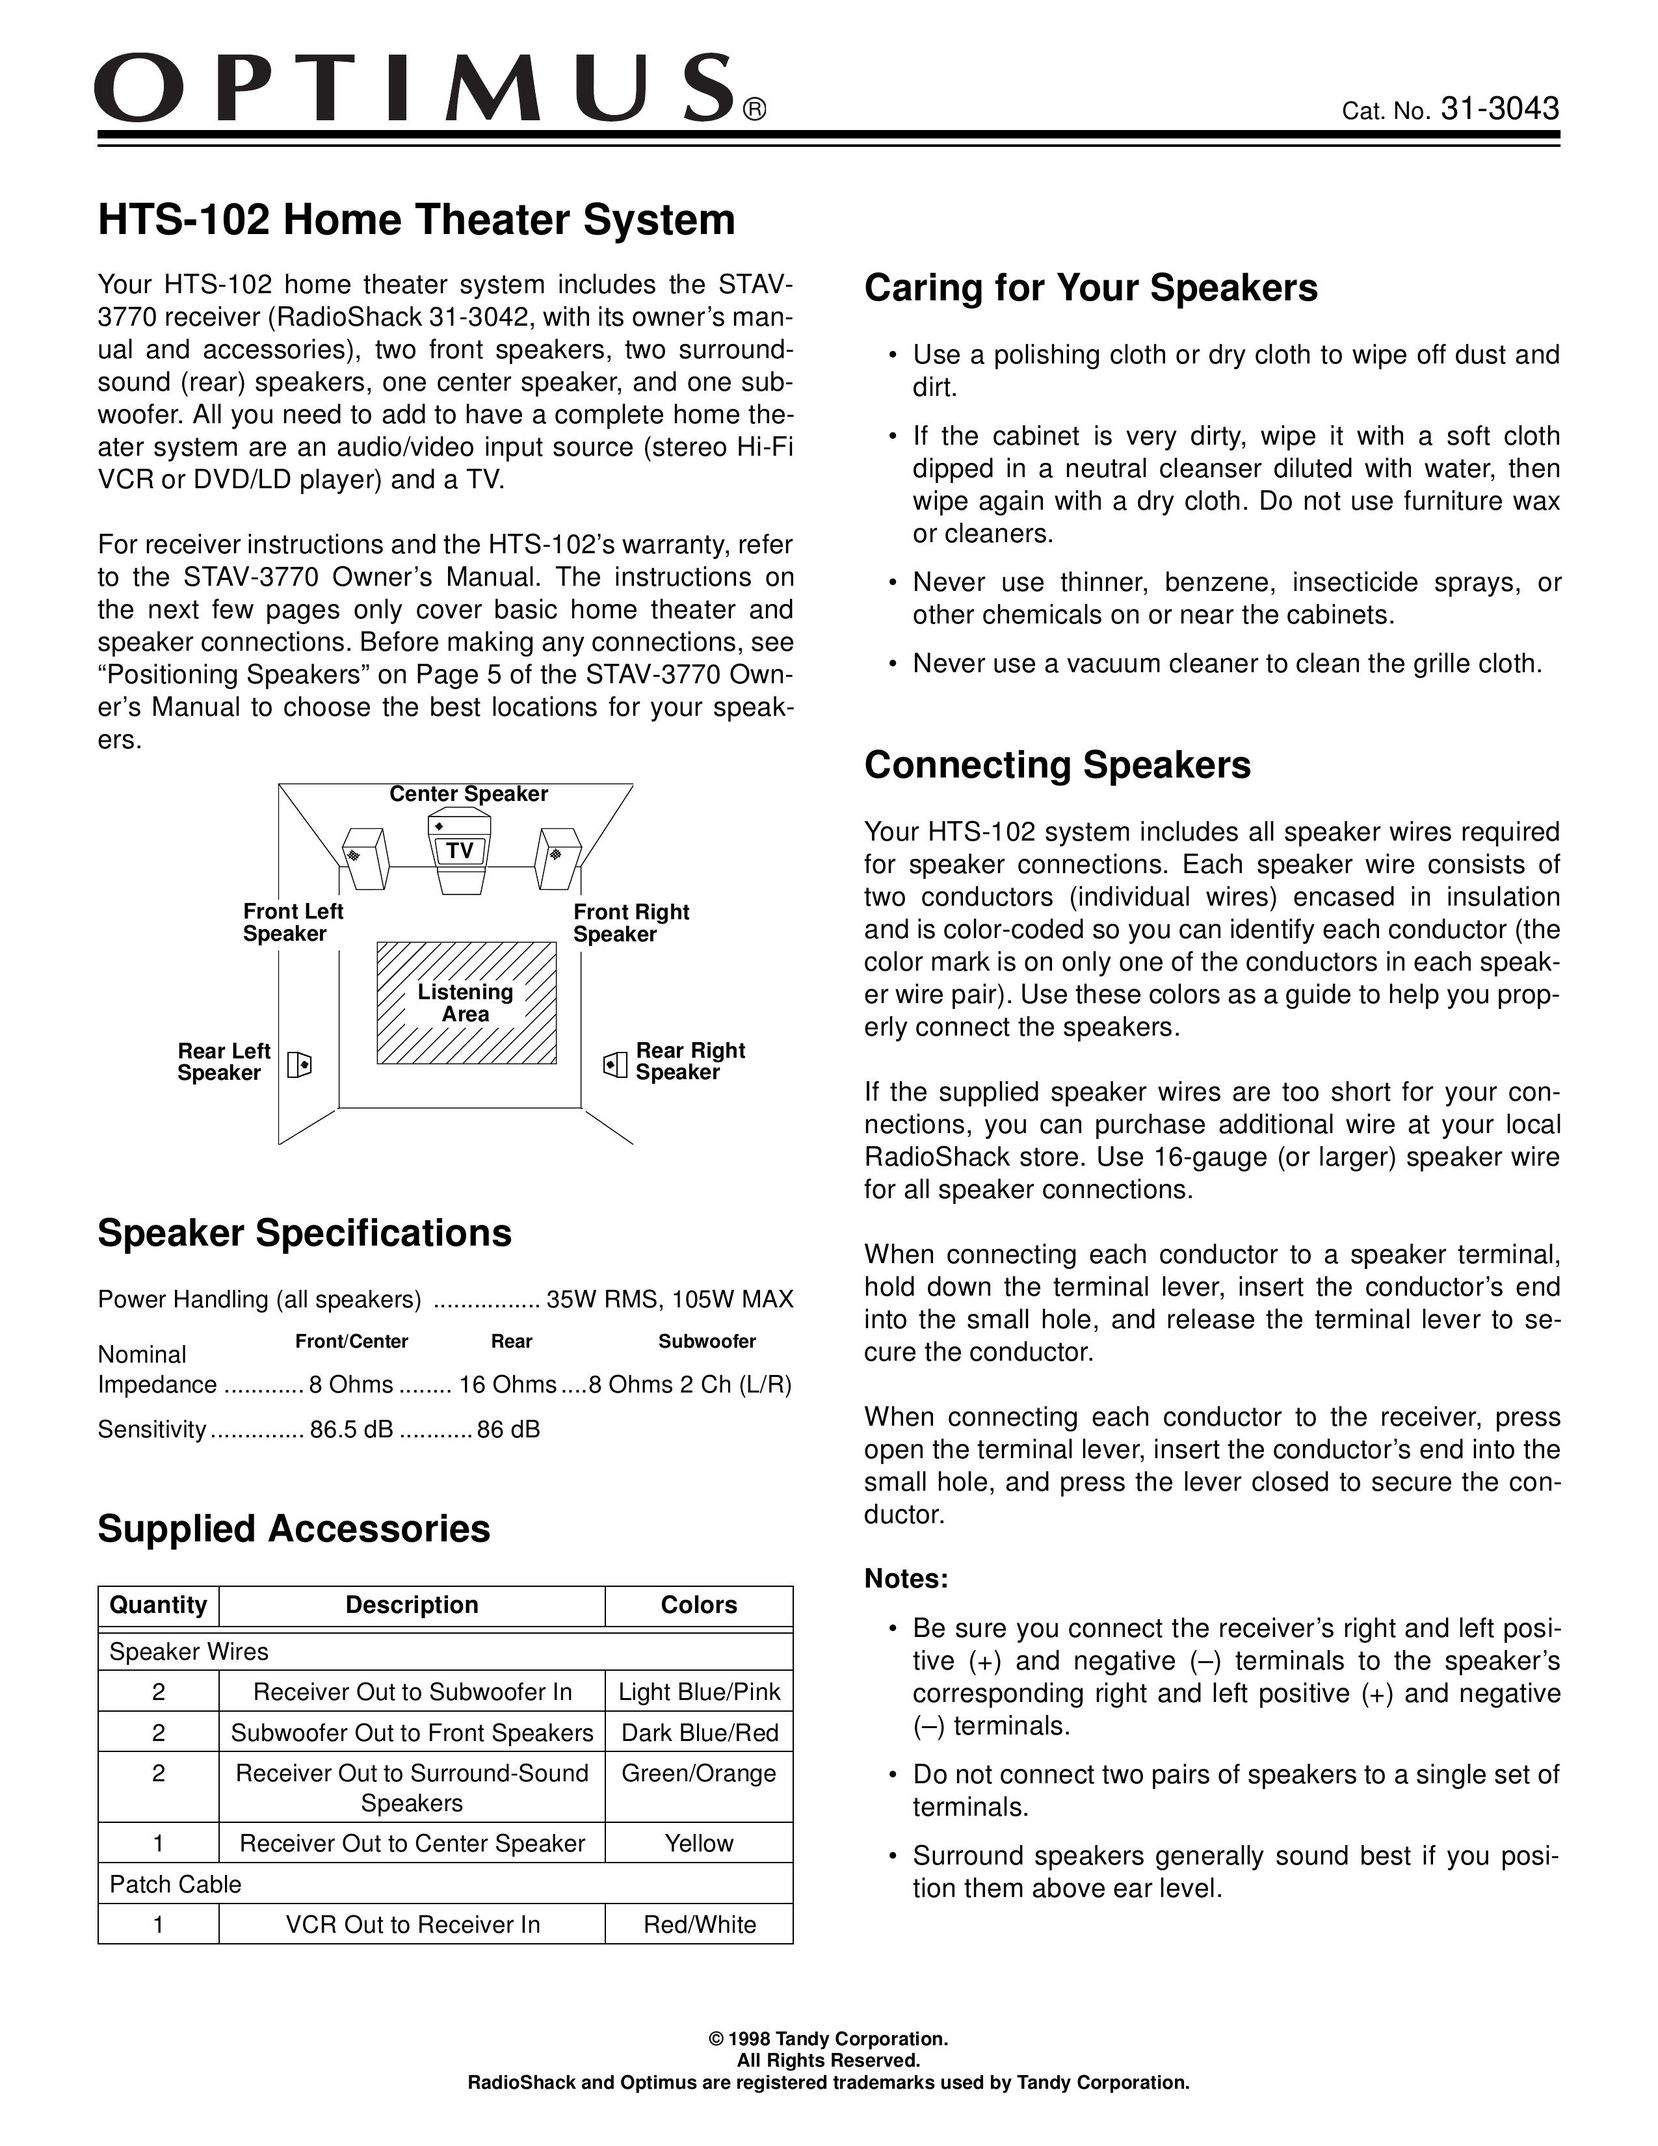 Optimus HTS-102 Home Theater System User Manual